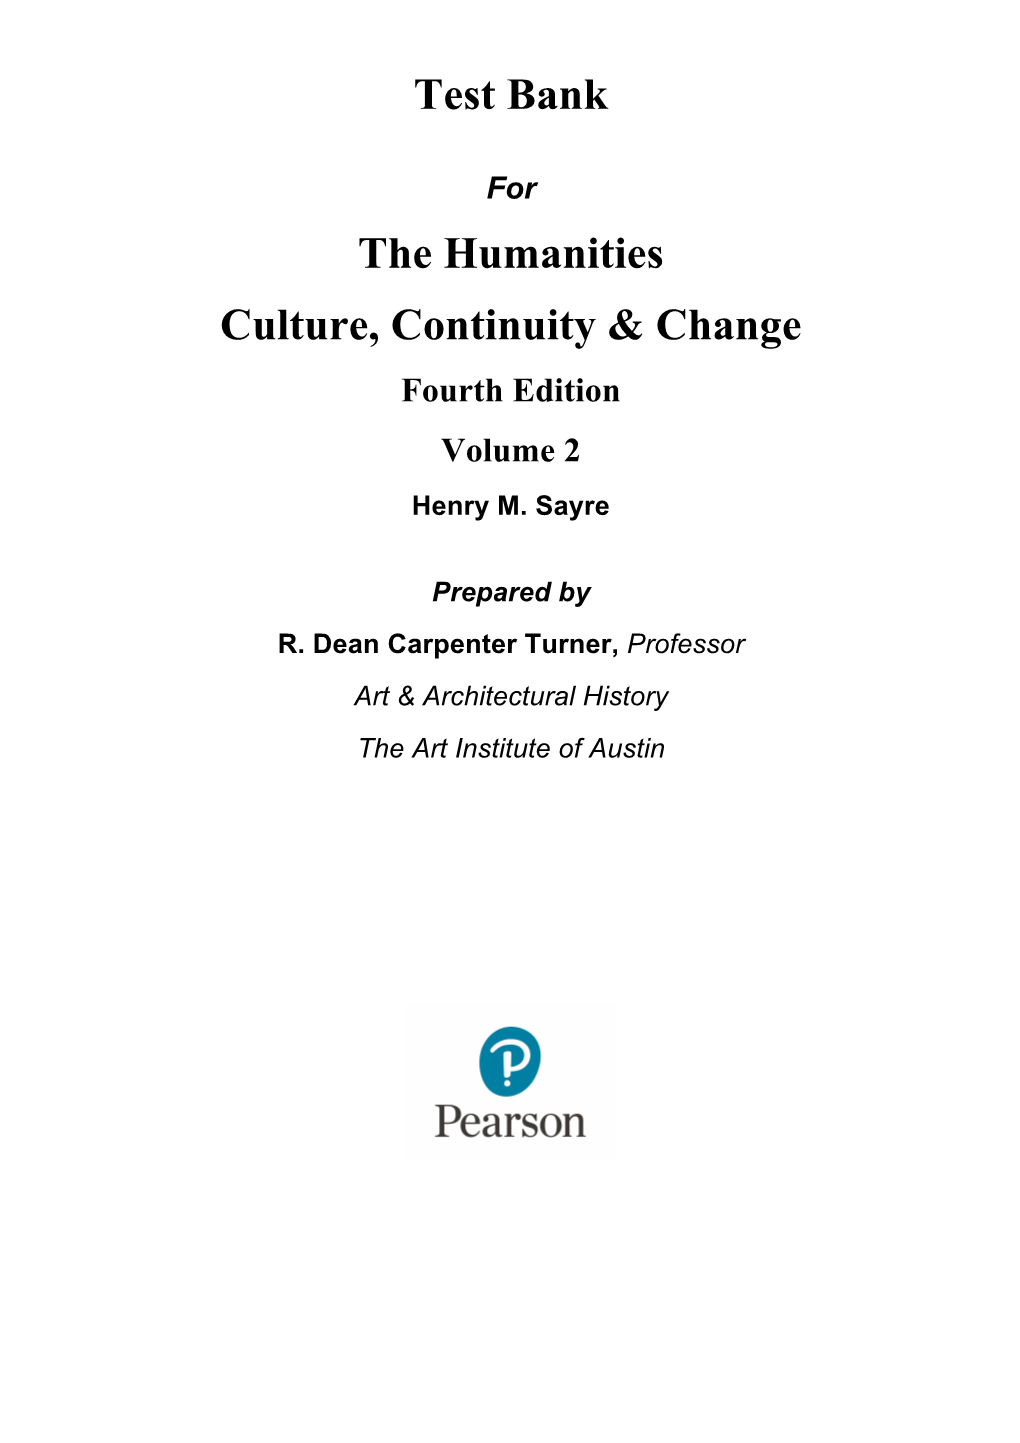 Test Bank the Humanities Culture, Continuity & Change